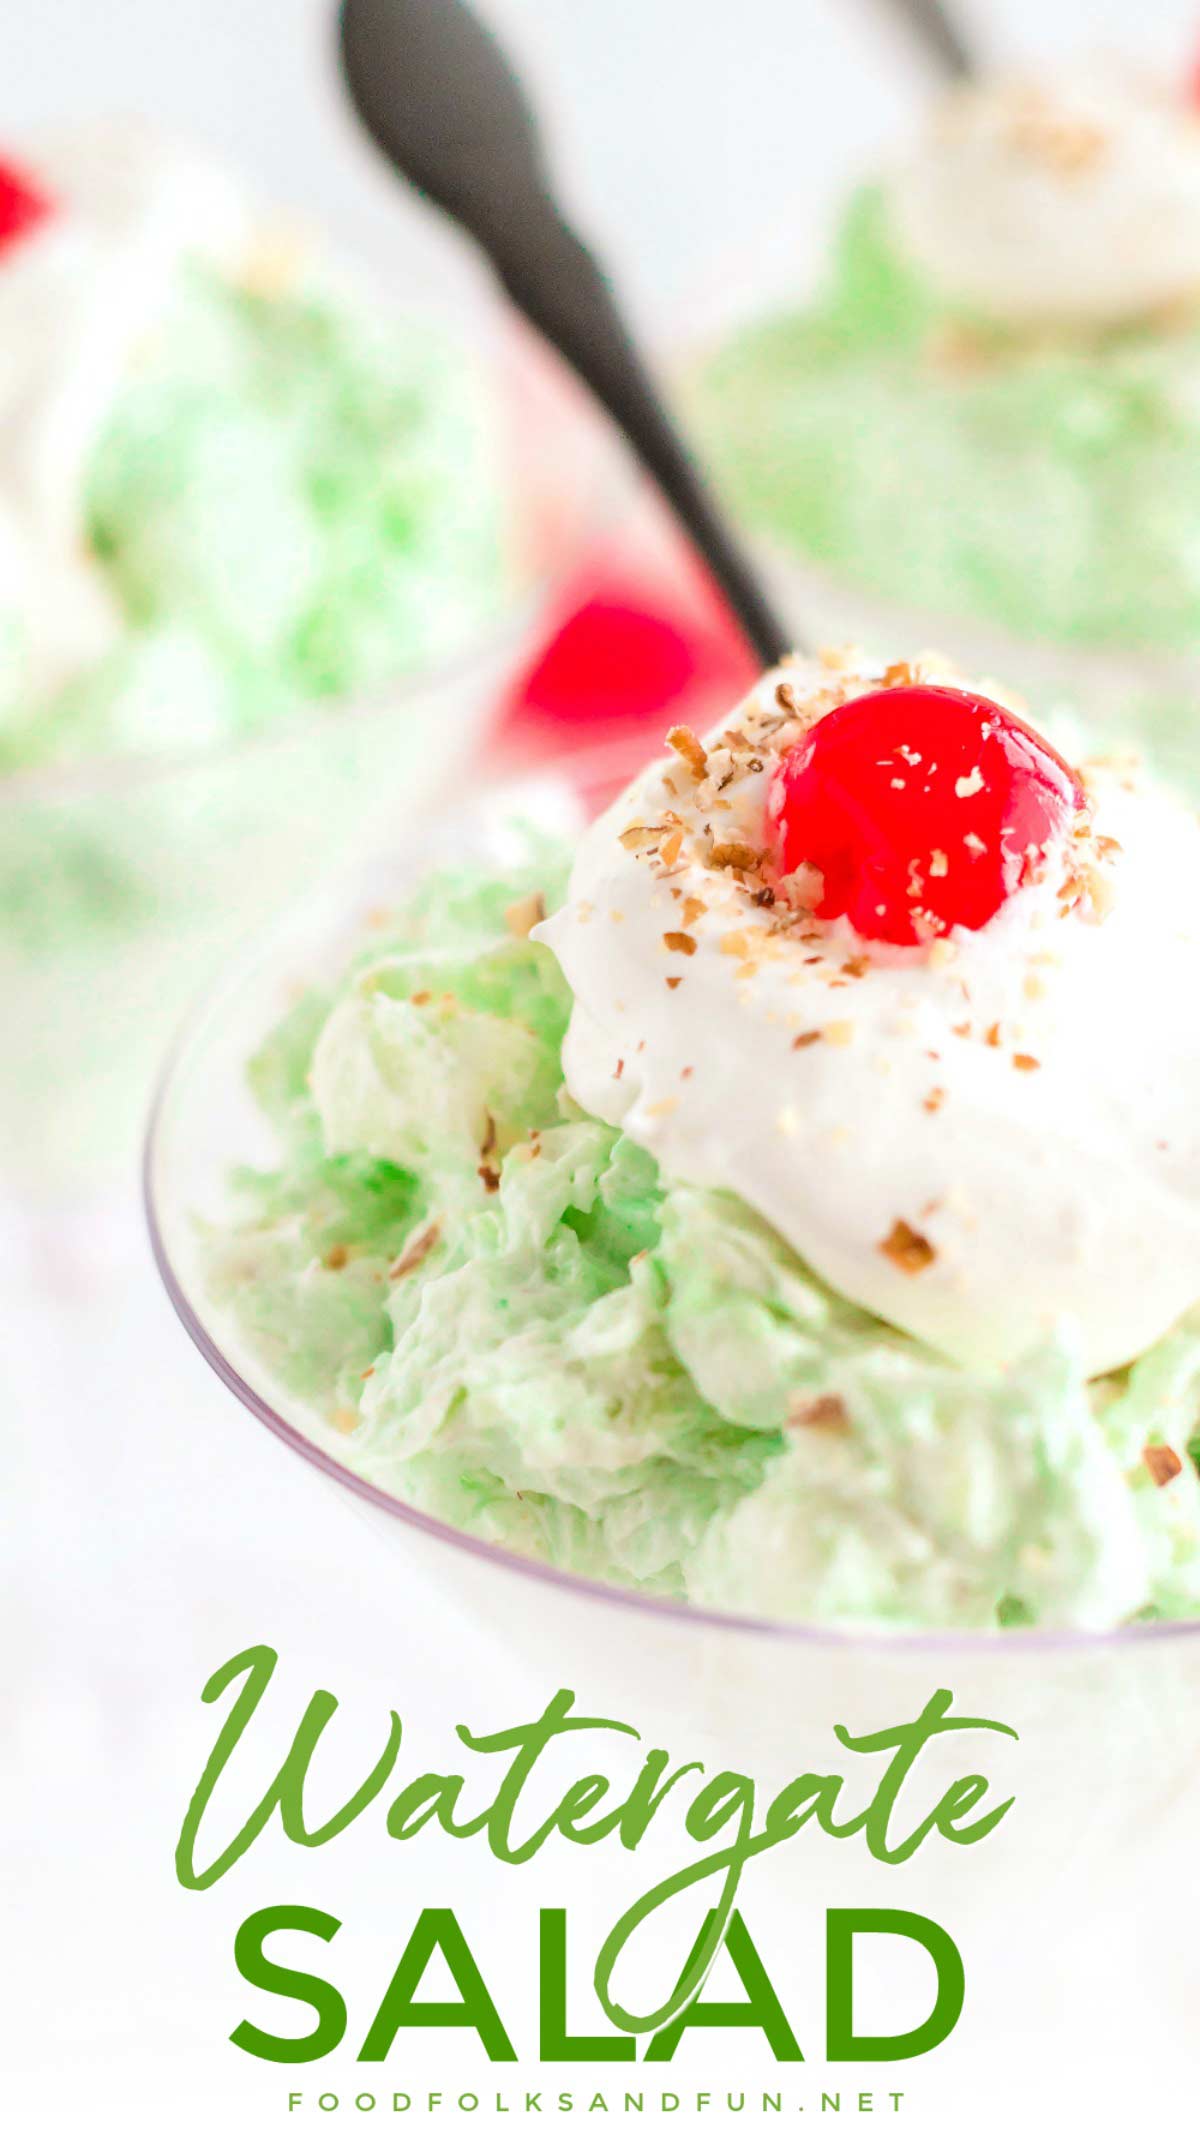 This Watergate salad is a fluffy and creamy pistachio salad that is easy to whip up and tastes even better the second day! It’s perfect for St. Patrick’s Day, Easter, Thanksgiving, Christmas, or anytime you’re craving a pistachio dessert! via @foodfolksandfun